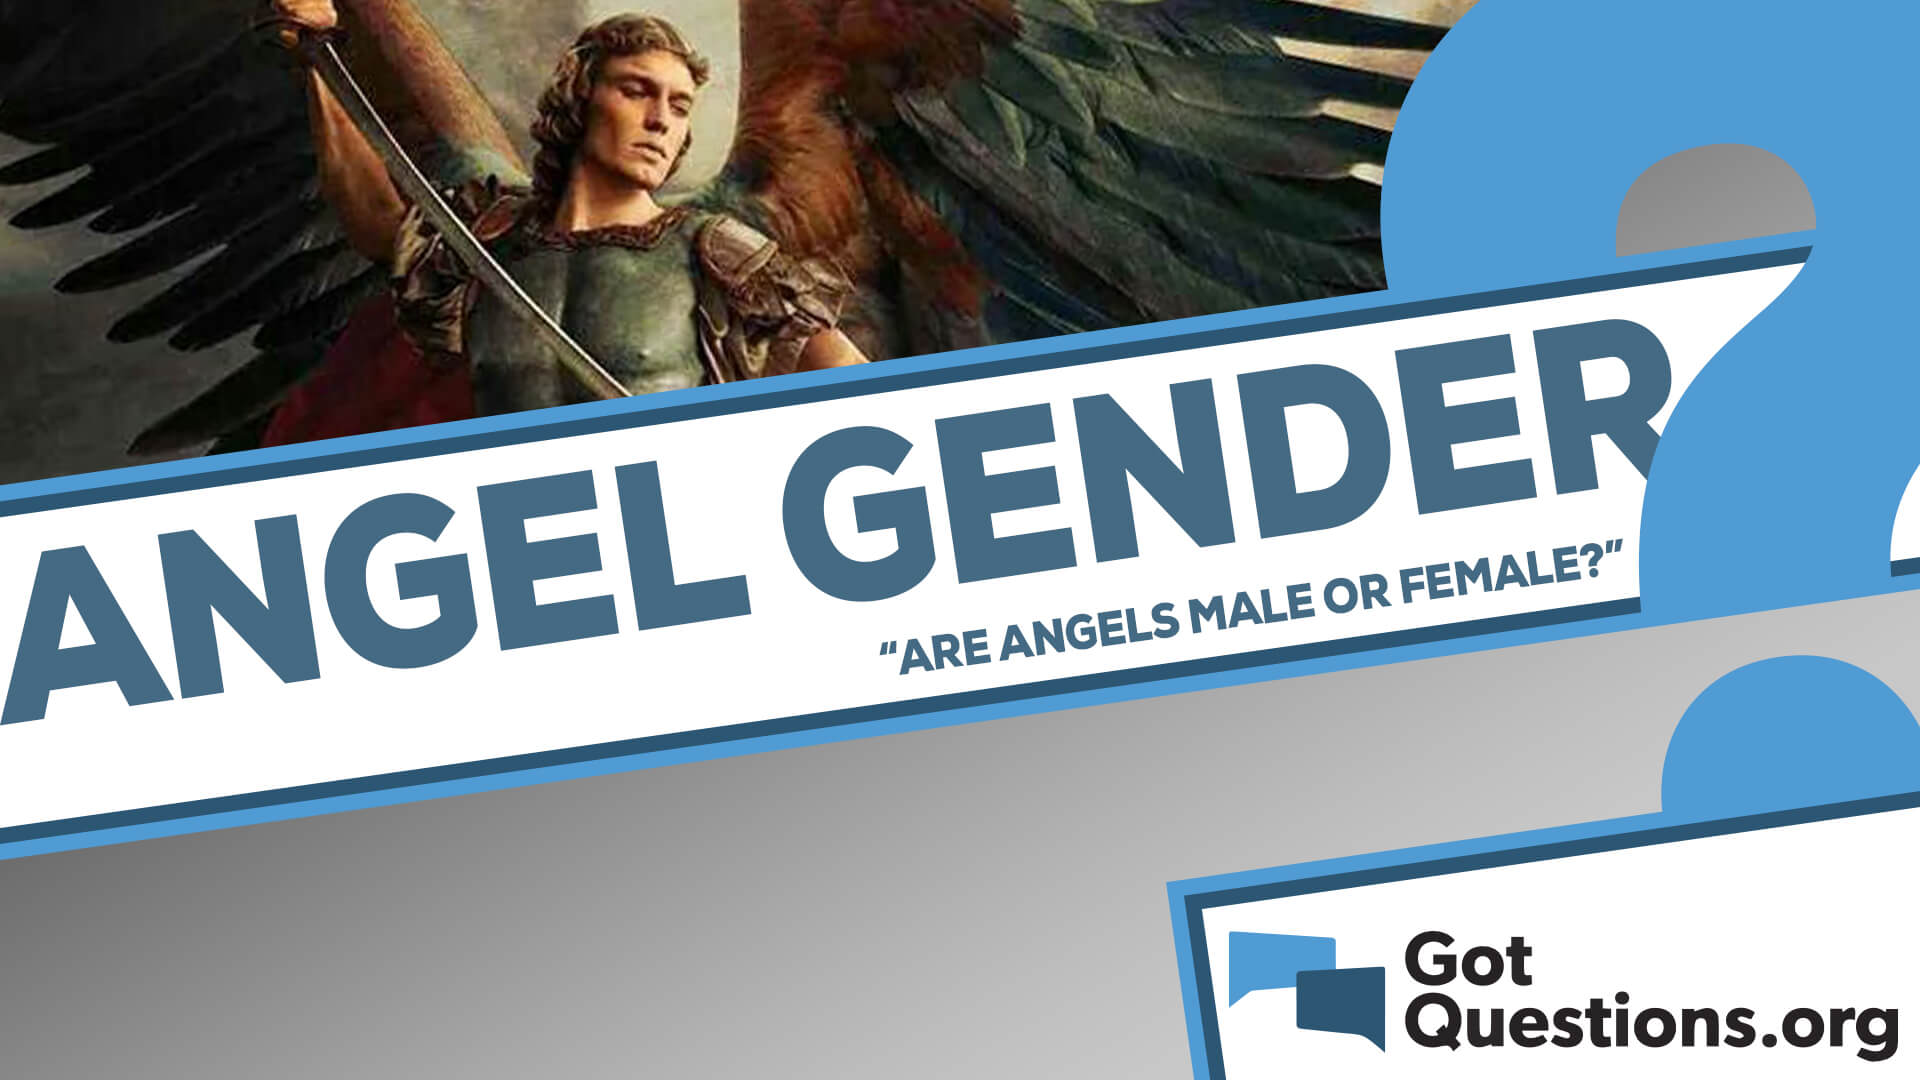 Are angels male or female?